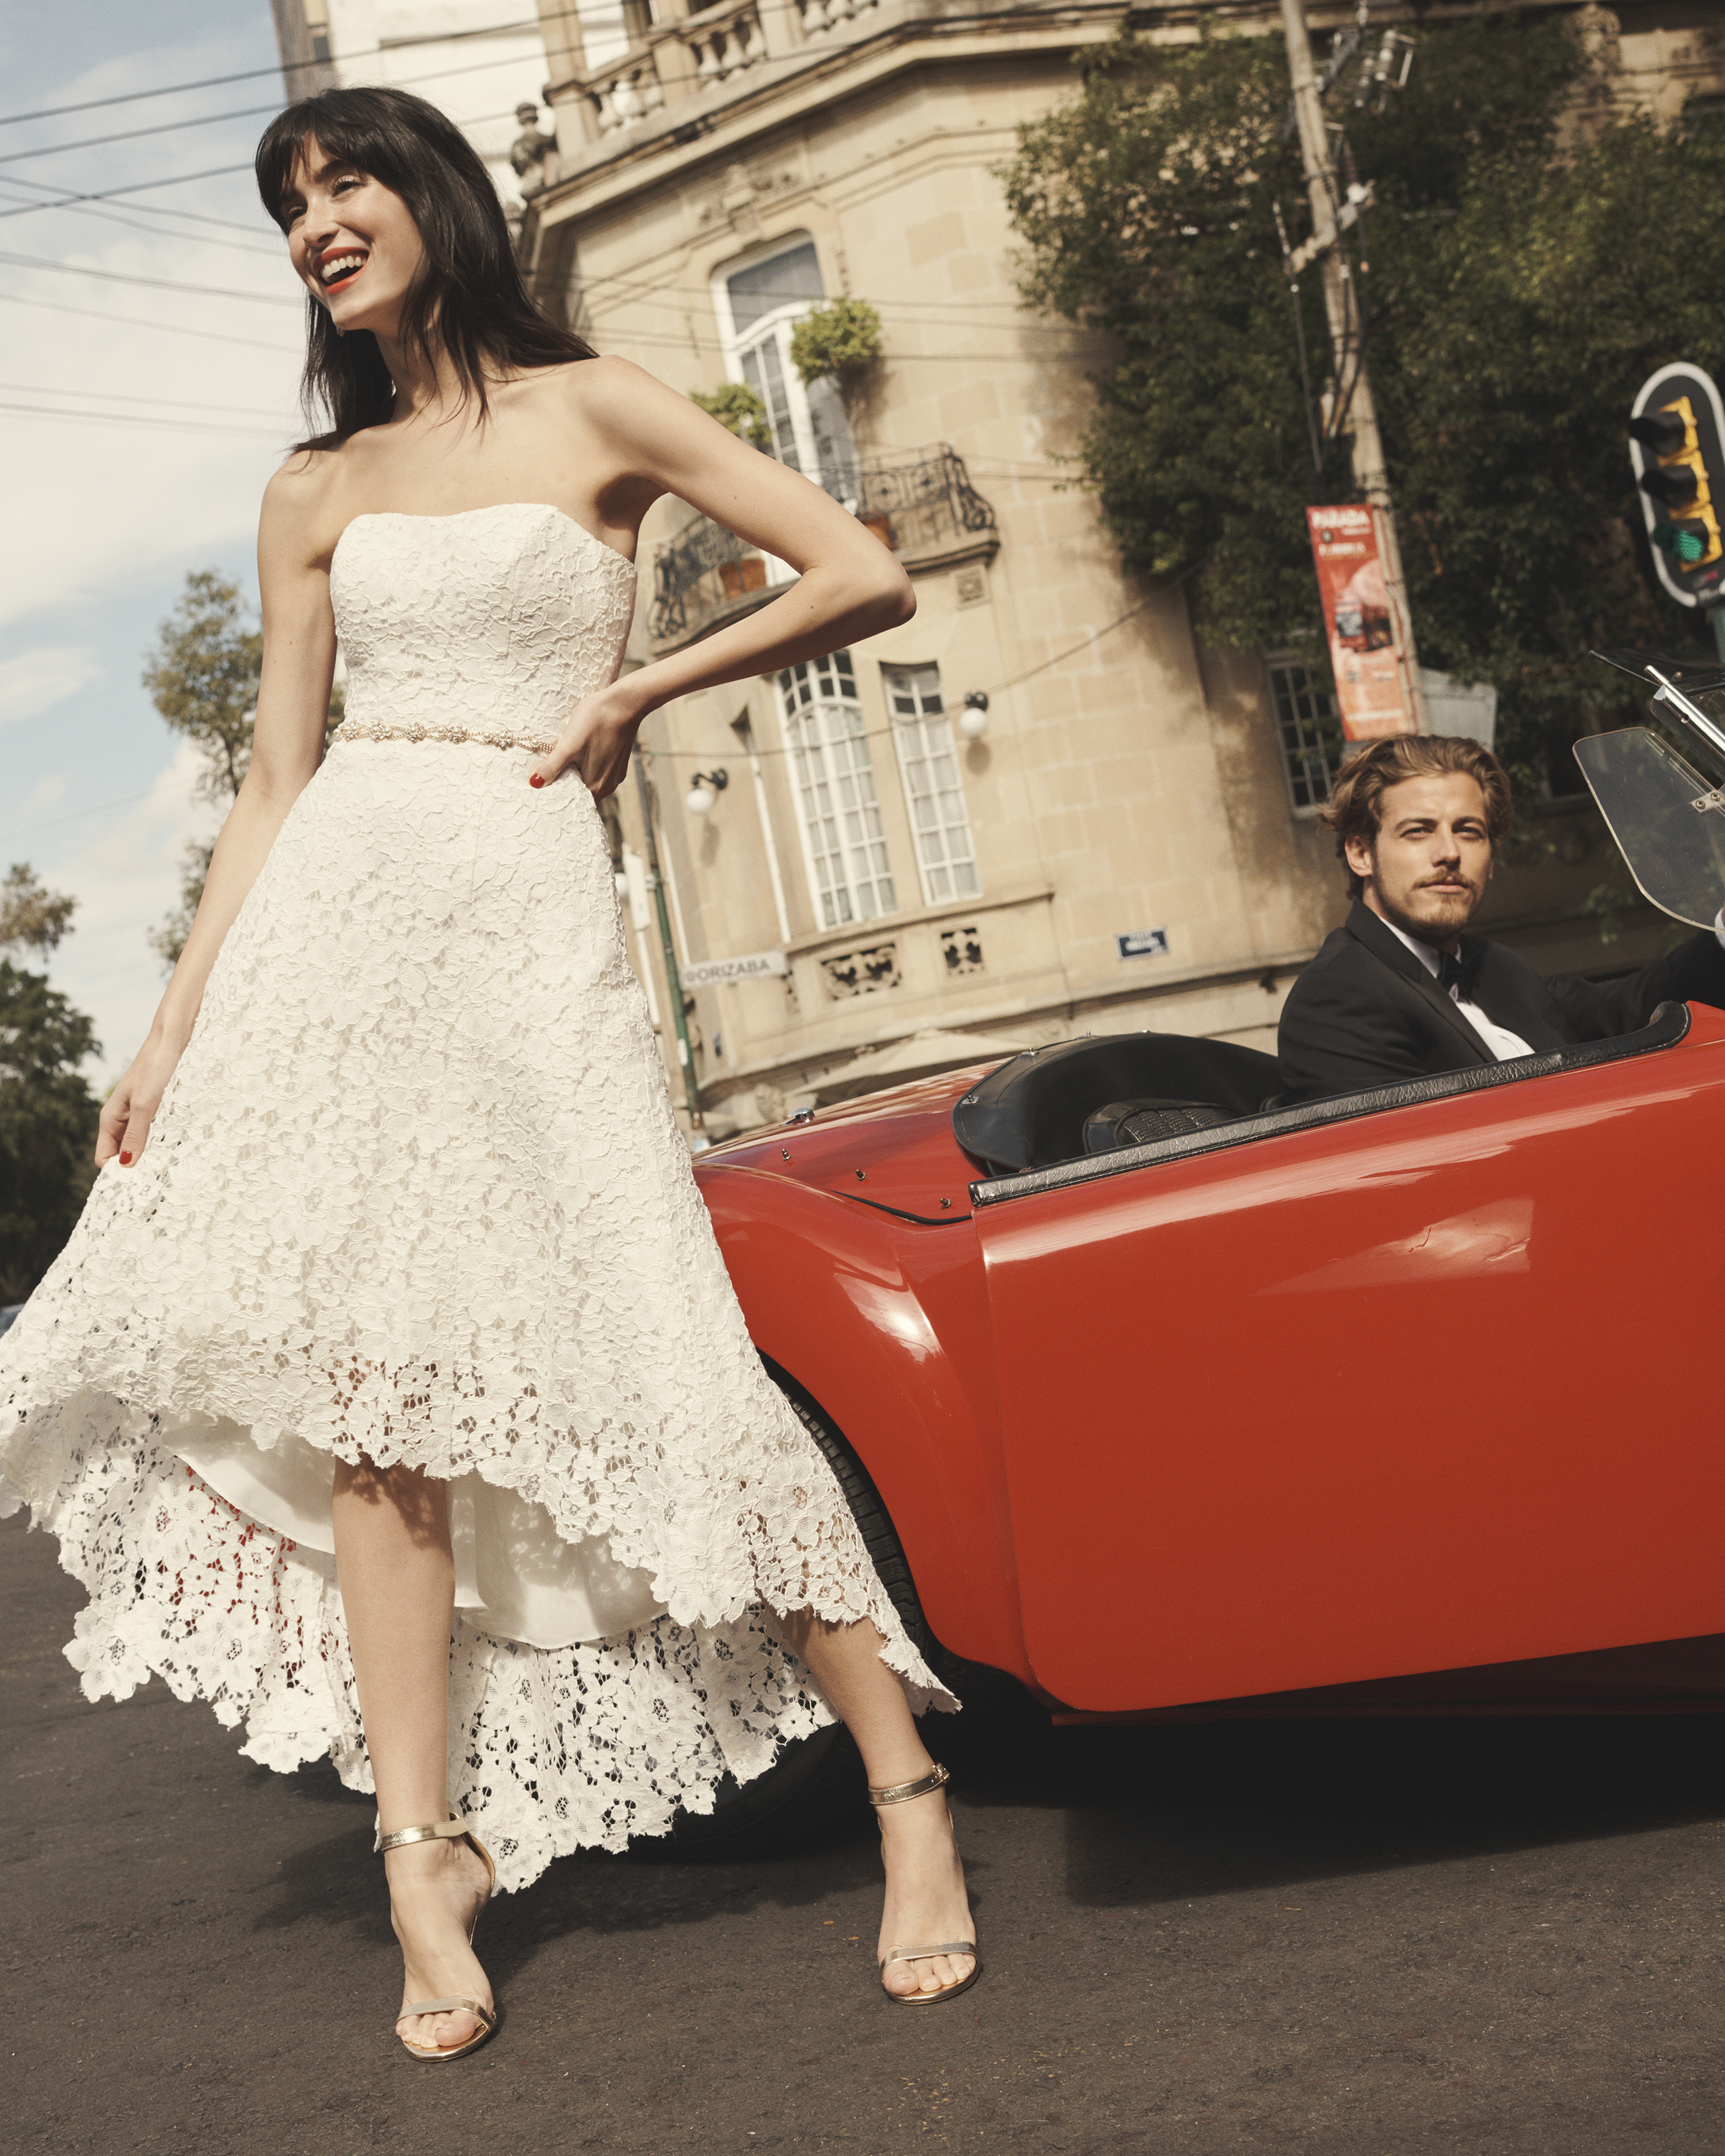 Smiling bride in strapless high-low lace dress on street in front of red convertible.